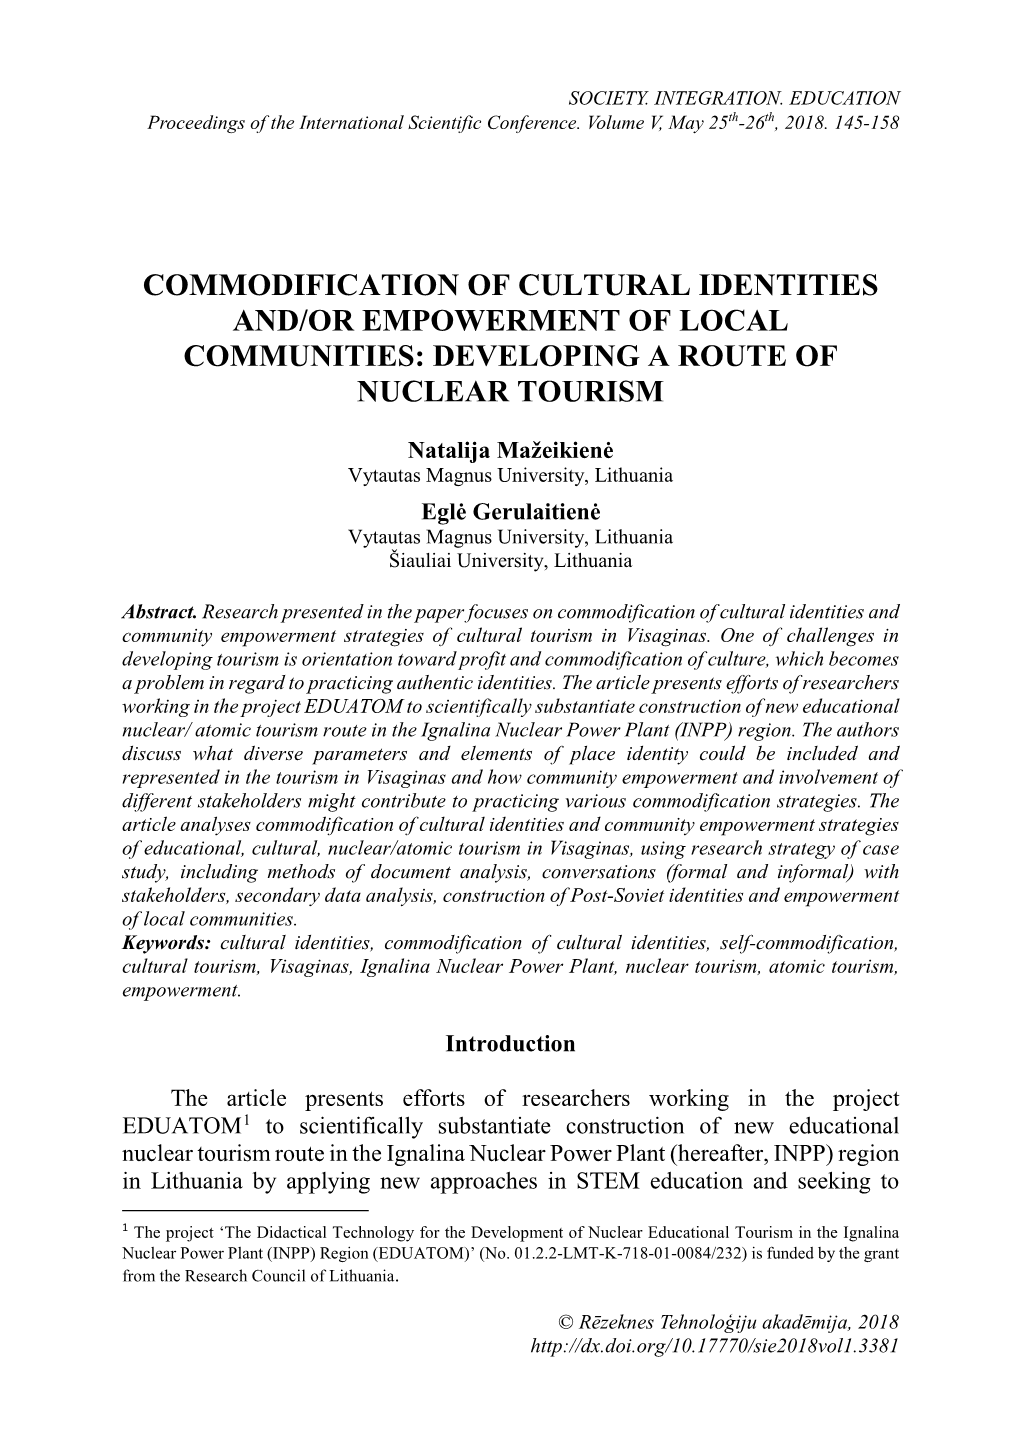 Commodification of Cultural Identities And/Or Empowerment of Local Communities: Developing a Route of Nuclear Tourism